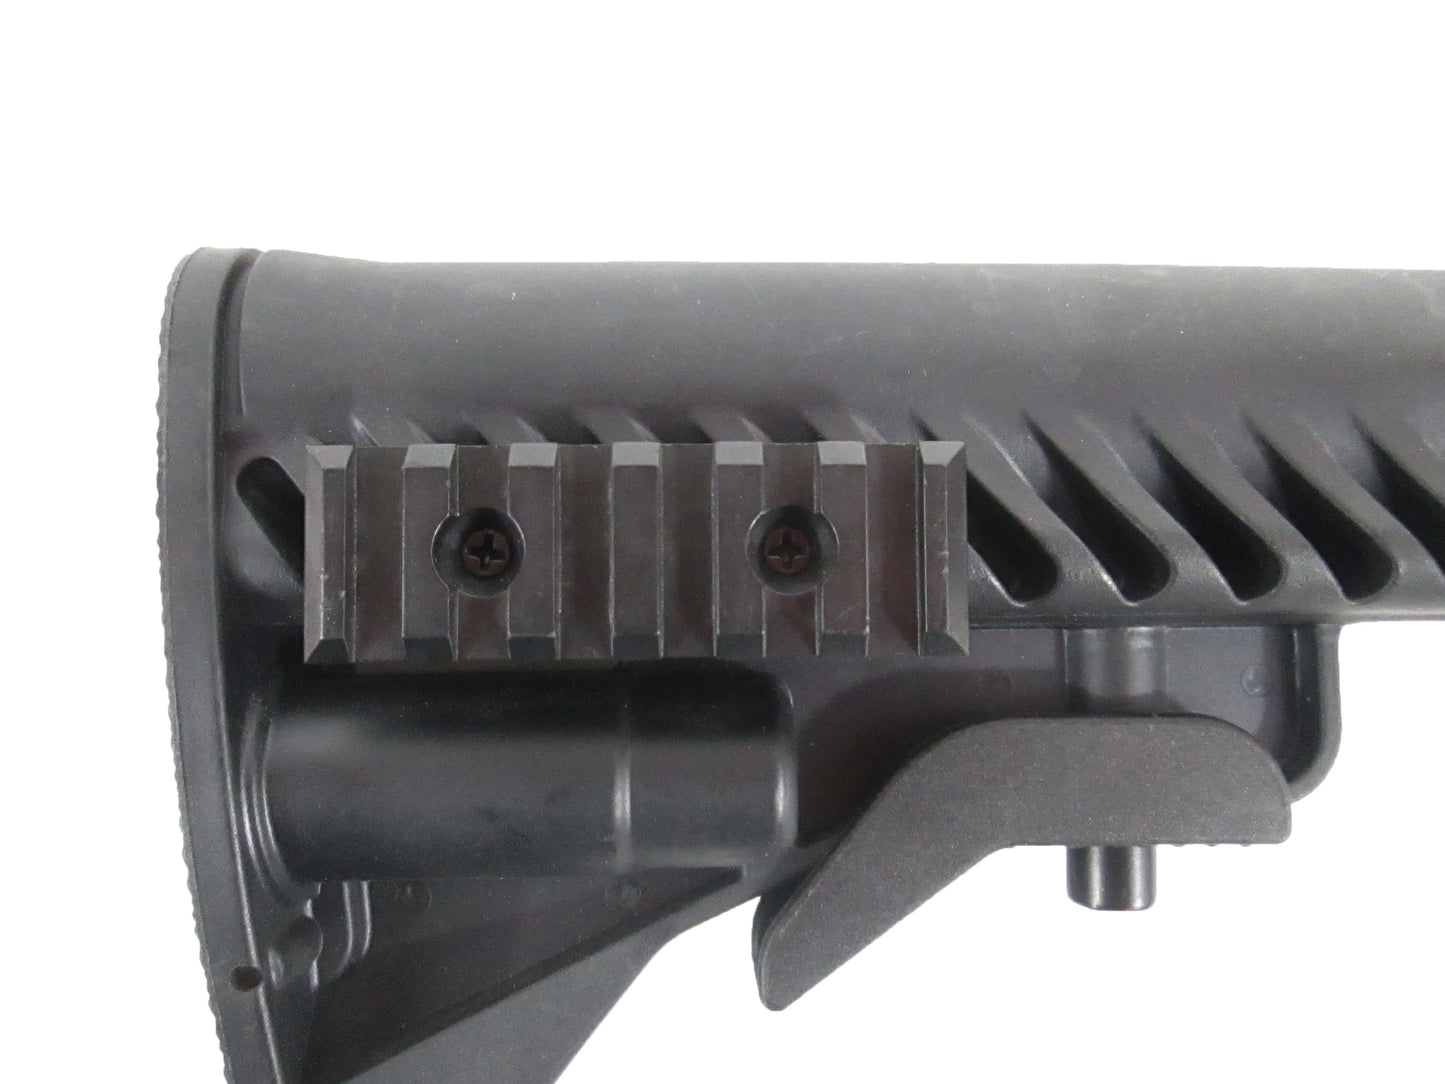 LE Retractable Stock Replacement w Integrated Accessory Rail